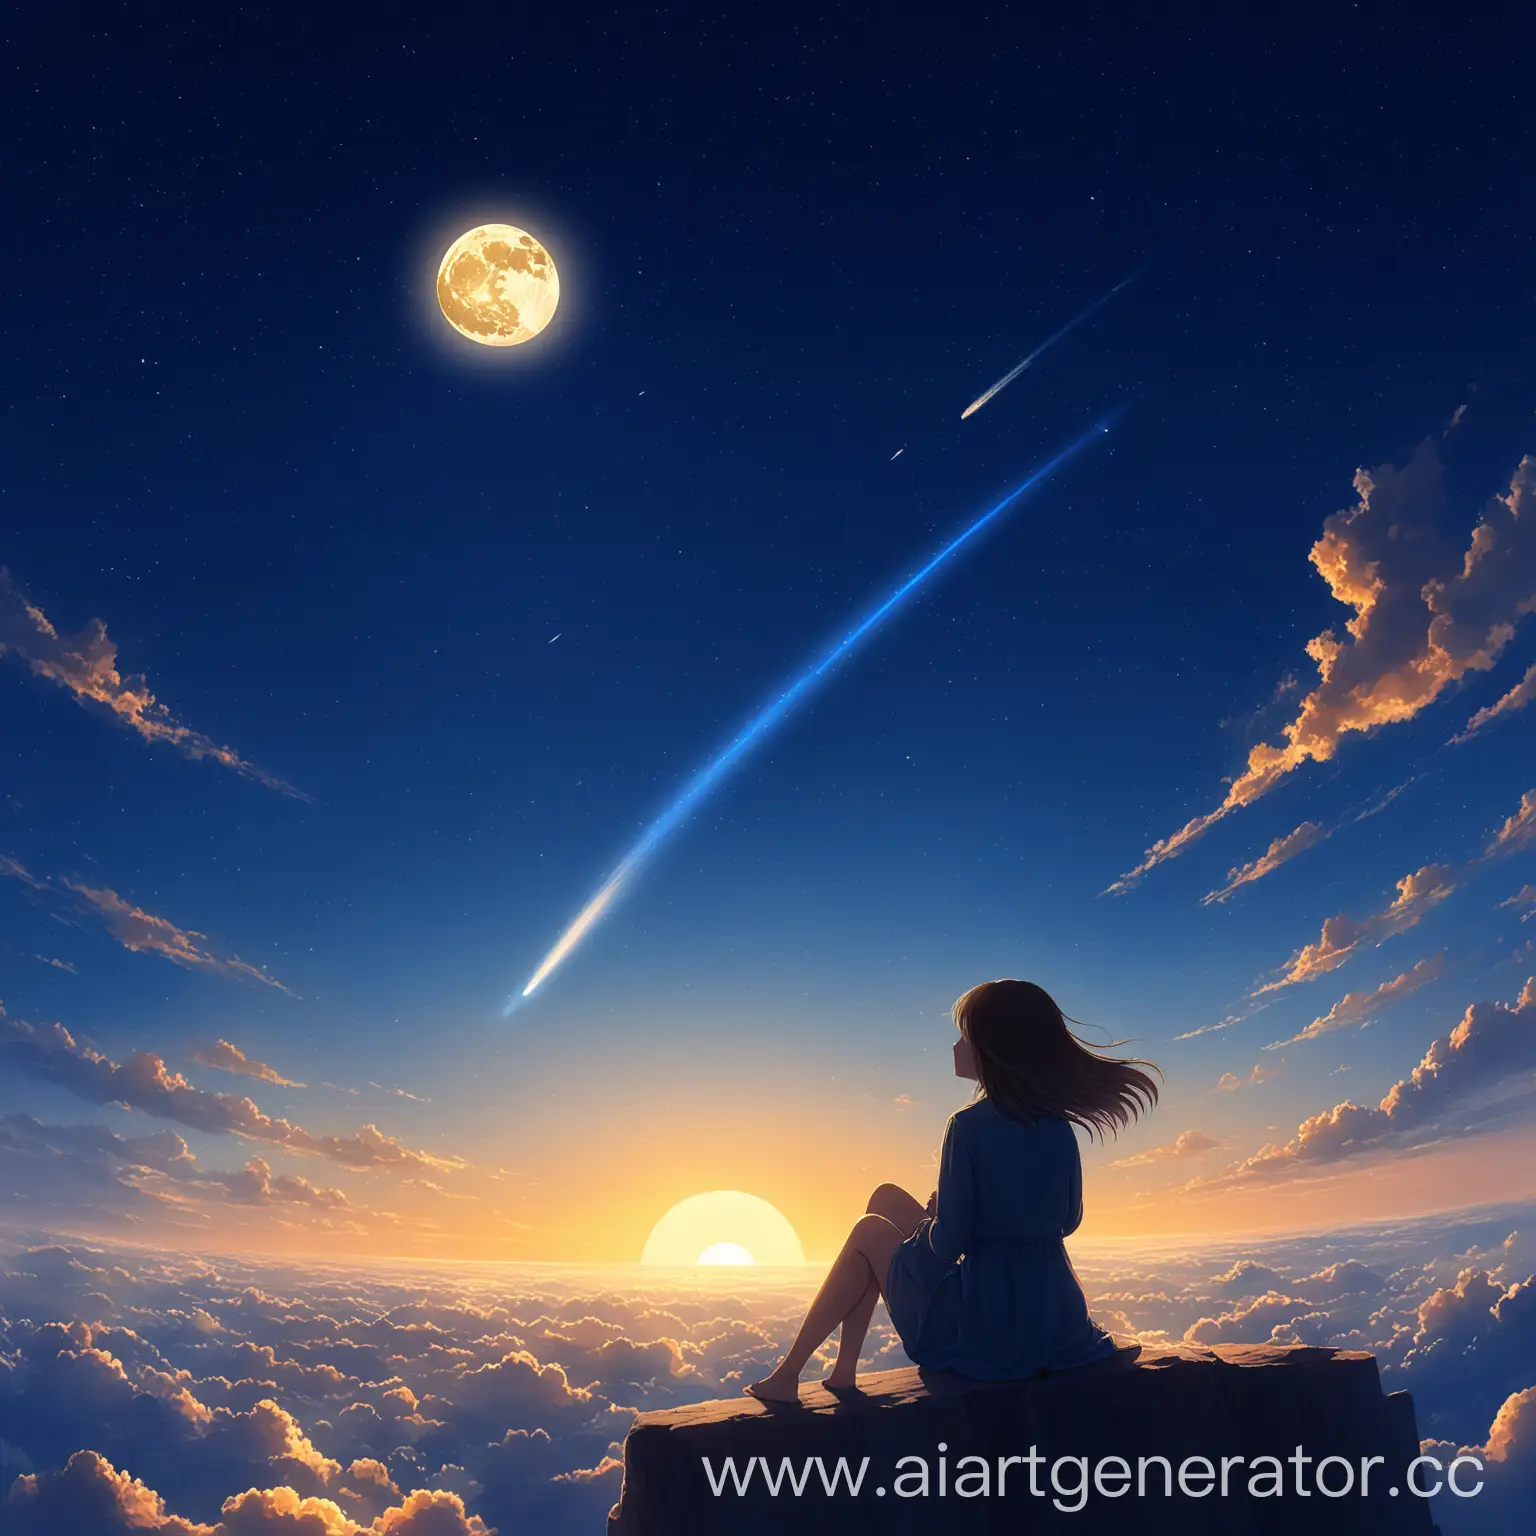 Girl-Sitting-under-Twilight-Sky-with-Moon-Clouds-and-Comet